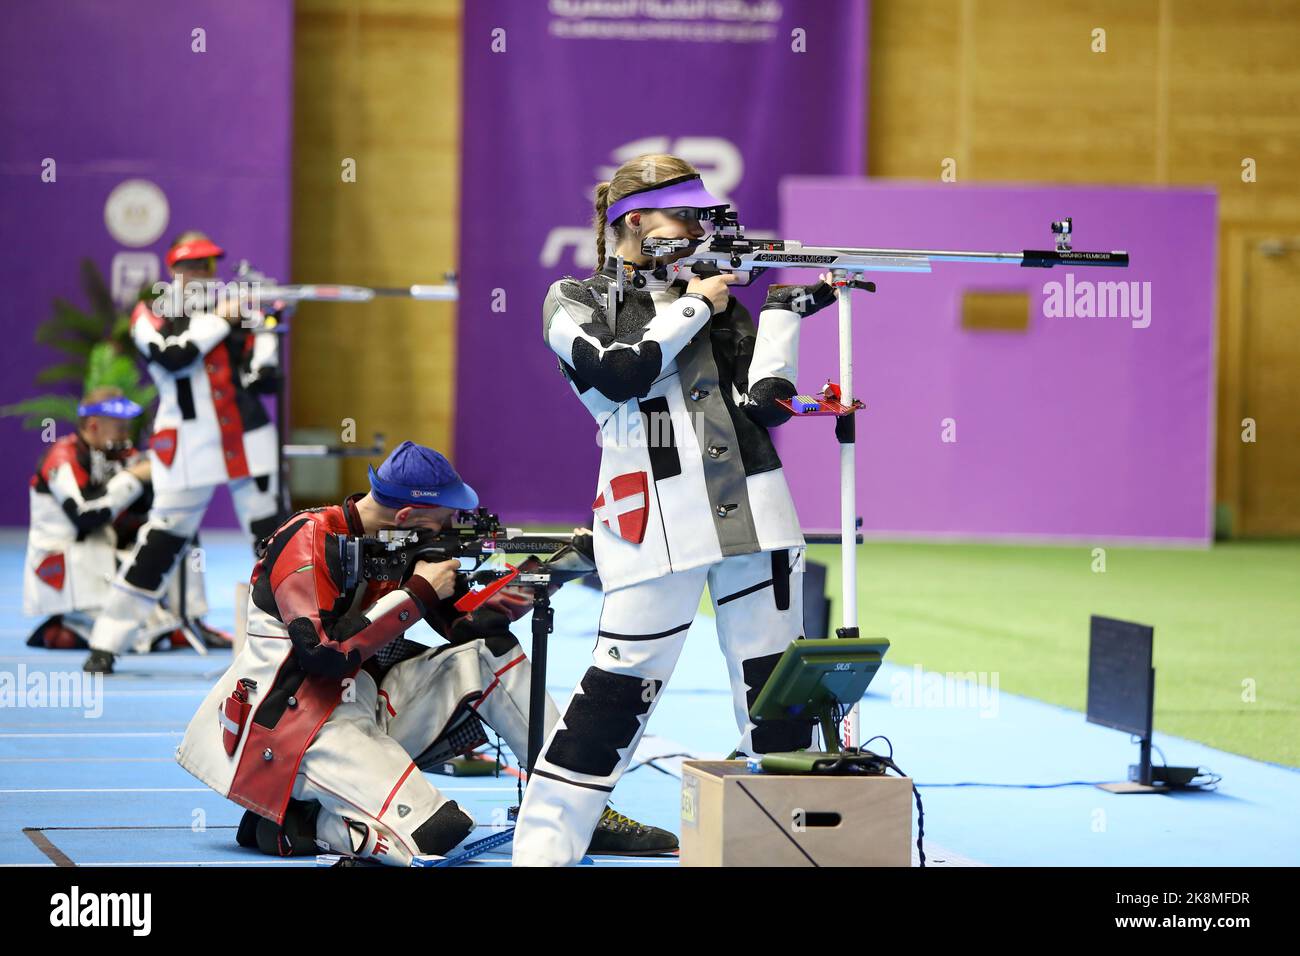 Cairo, Egypt. 24th Oct, 2022. Stephanie Laura Scurrah Grundsoee (1st R)/Steffen Olsen (2nd R) of Denmark and Jenny Stene/Simon Claussen of Norway compete during their 50m rifle 3 positions mixed team gold medal match at the ISSF World Championship Rifle/Pistol in Cairo, Egypt, Oct. 24, 2022. Credit: Ahmed Gomaa/Xinhua/Alamy Live News Stock Photo